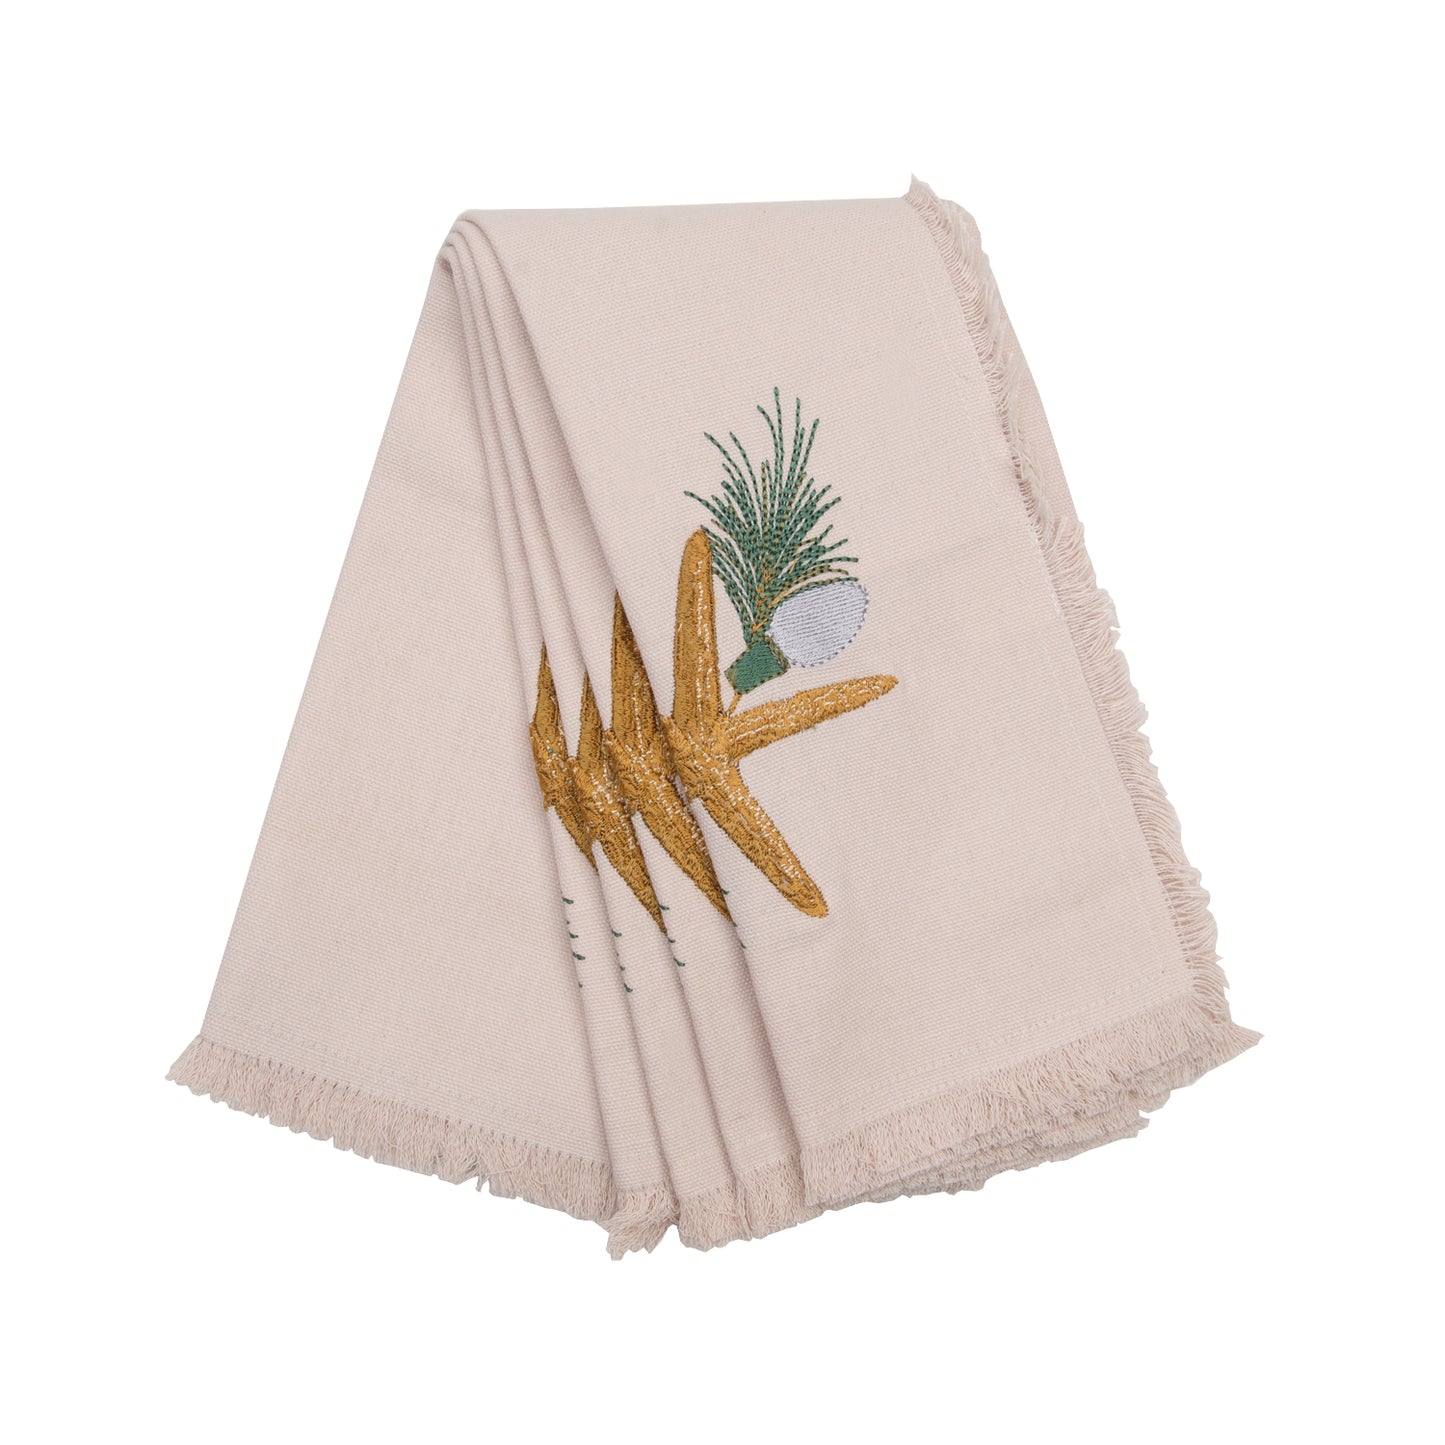 4 folded natural cotton fringed napkins featuring an embroidered sea star, holiday lights, and evergreen needles.